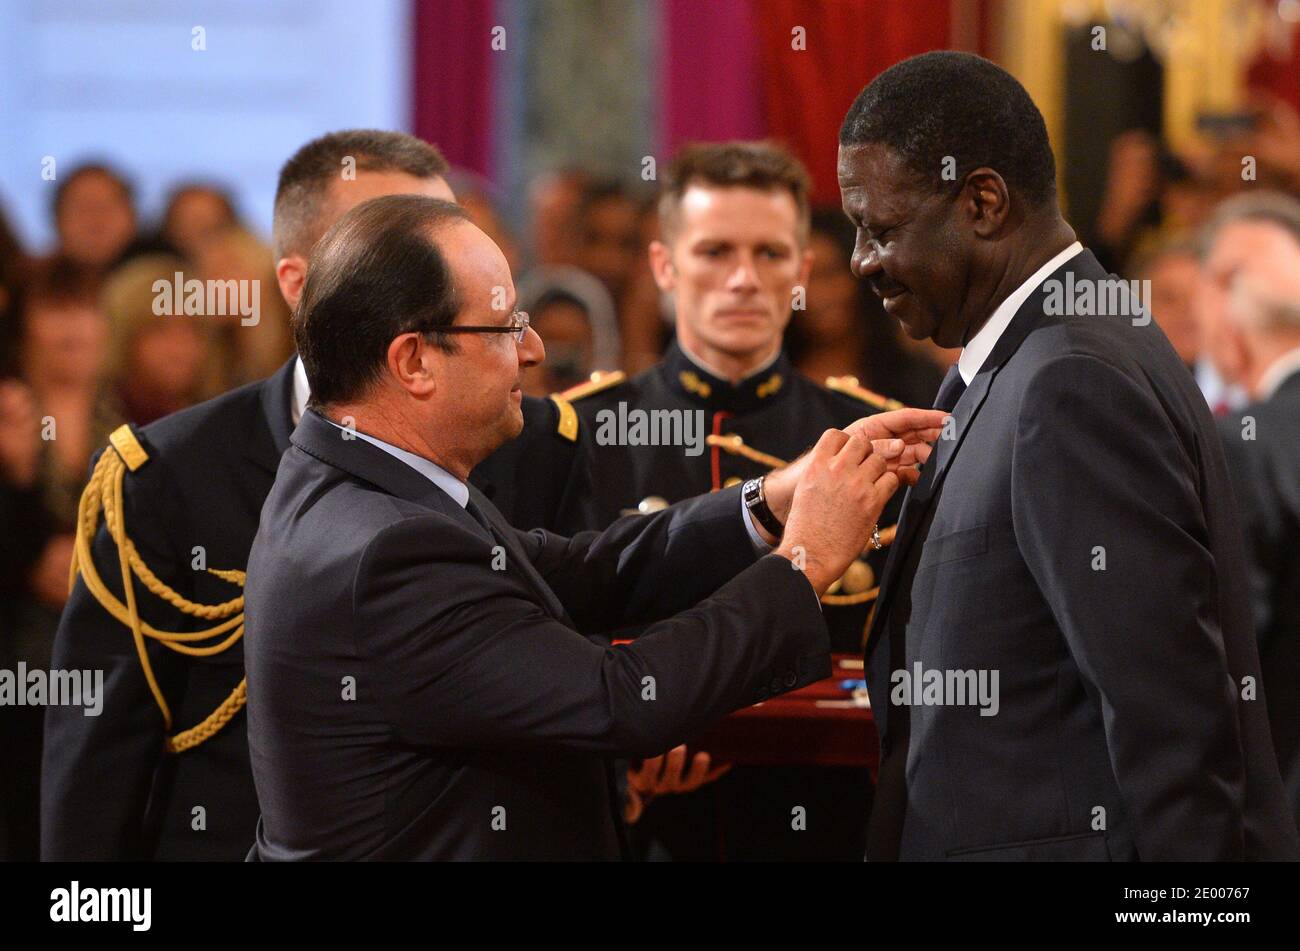 French President Francois Hollande (L) awards the Legion of Honor and National Order of Merit insignia to former Olympique de Marseille football club president Pape Diouf (R) during a ceremony to award French sports personalities at the Elysee Palace in Paris, France on October 9, 2013. Photo by Christian Liewig/ABACAPRESS.COM Stock Photo